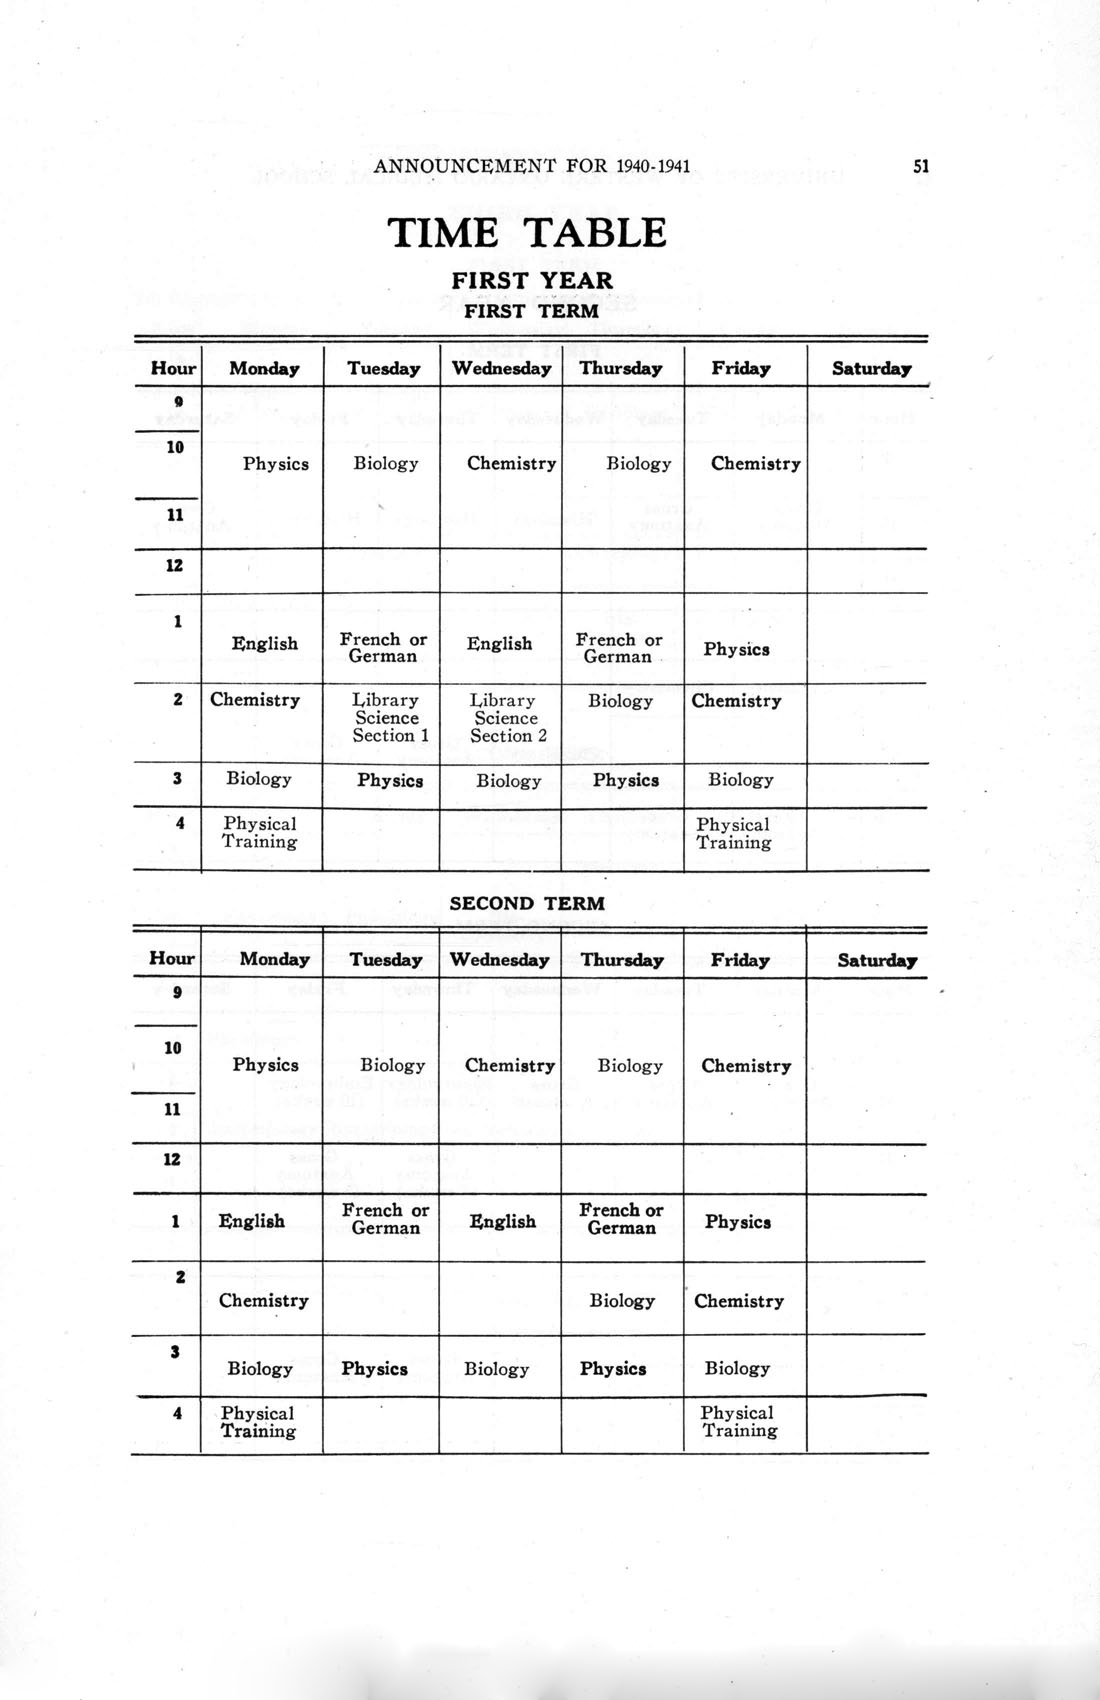 Faculty Of Medicine Calendar 1940-1941, First Year Timetable